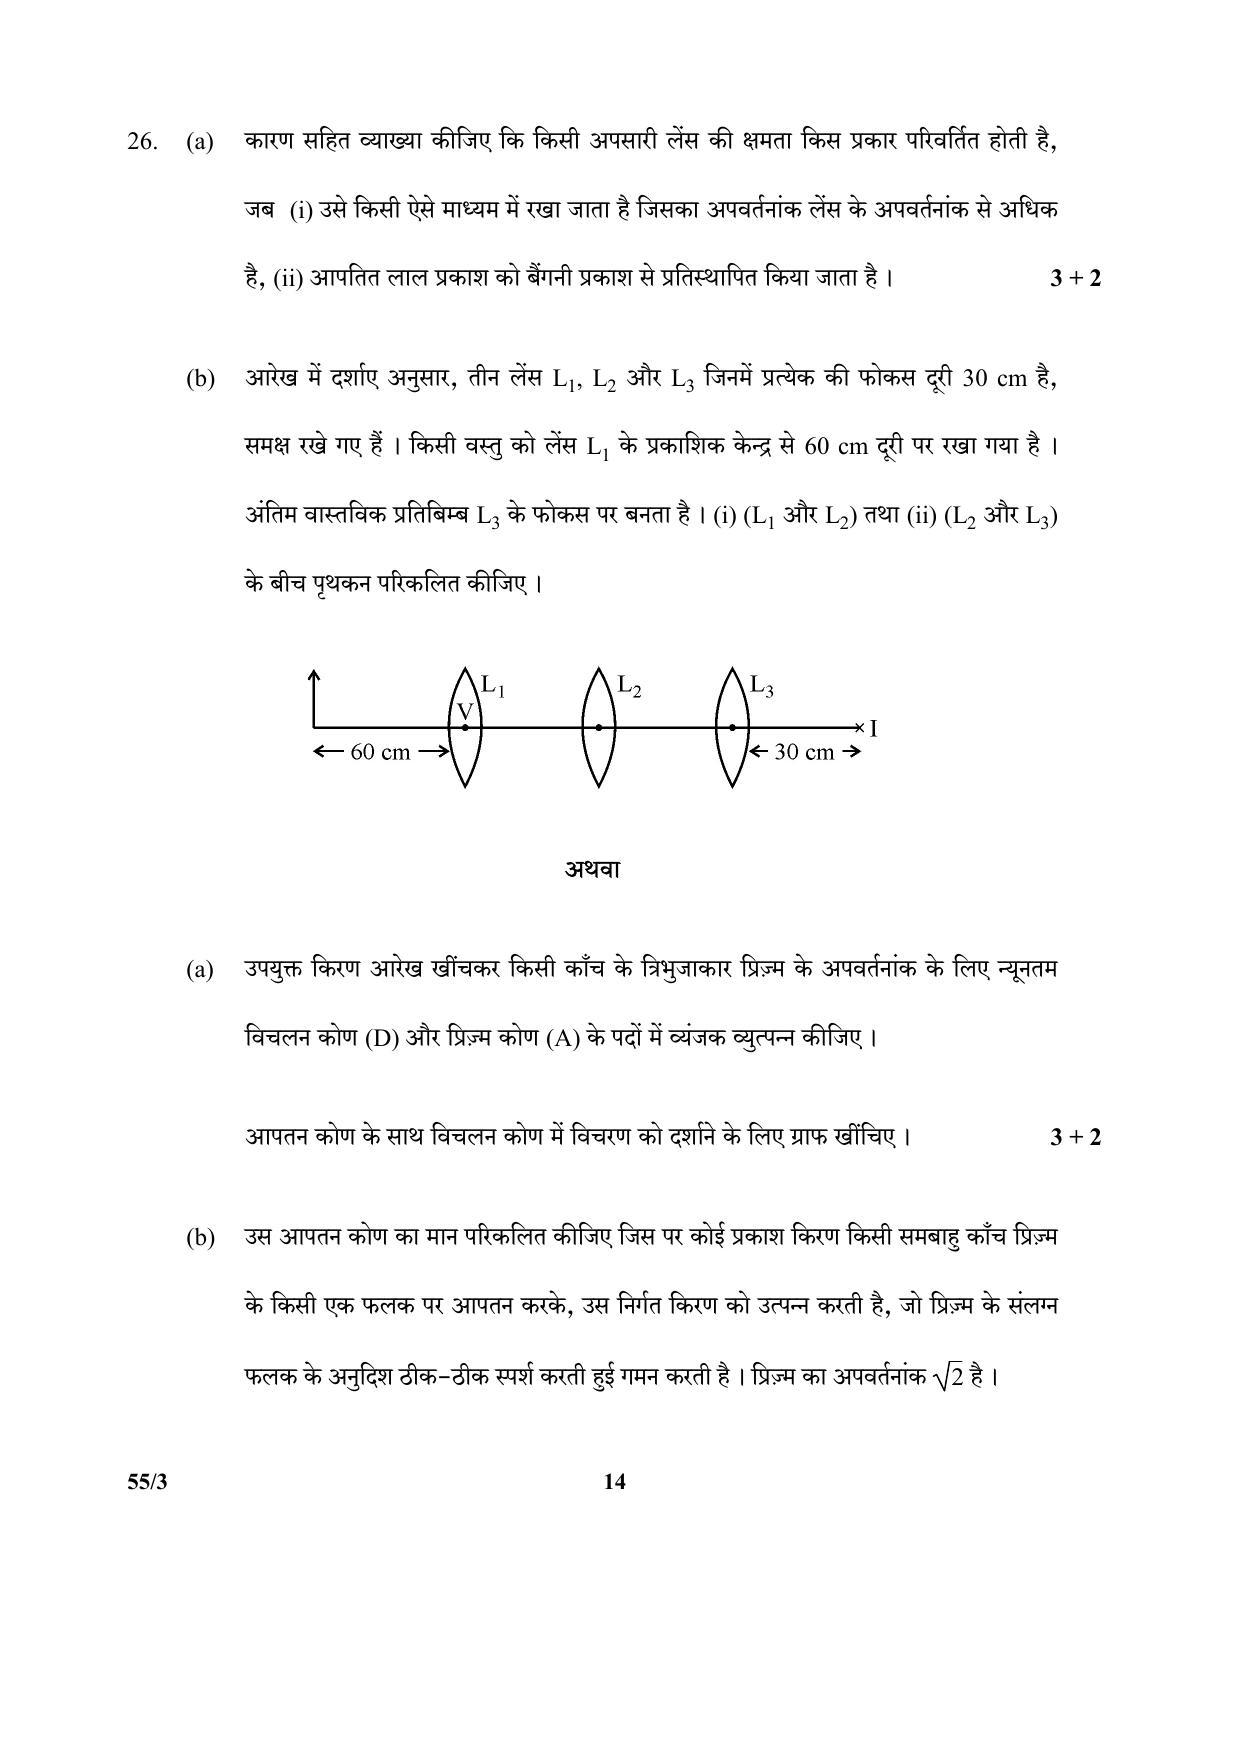 CBSE Class 12 55-3 (Physics) 2017-comptt Question Paper - Page 14